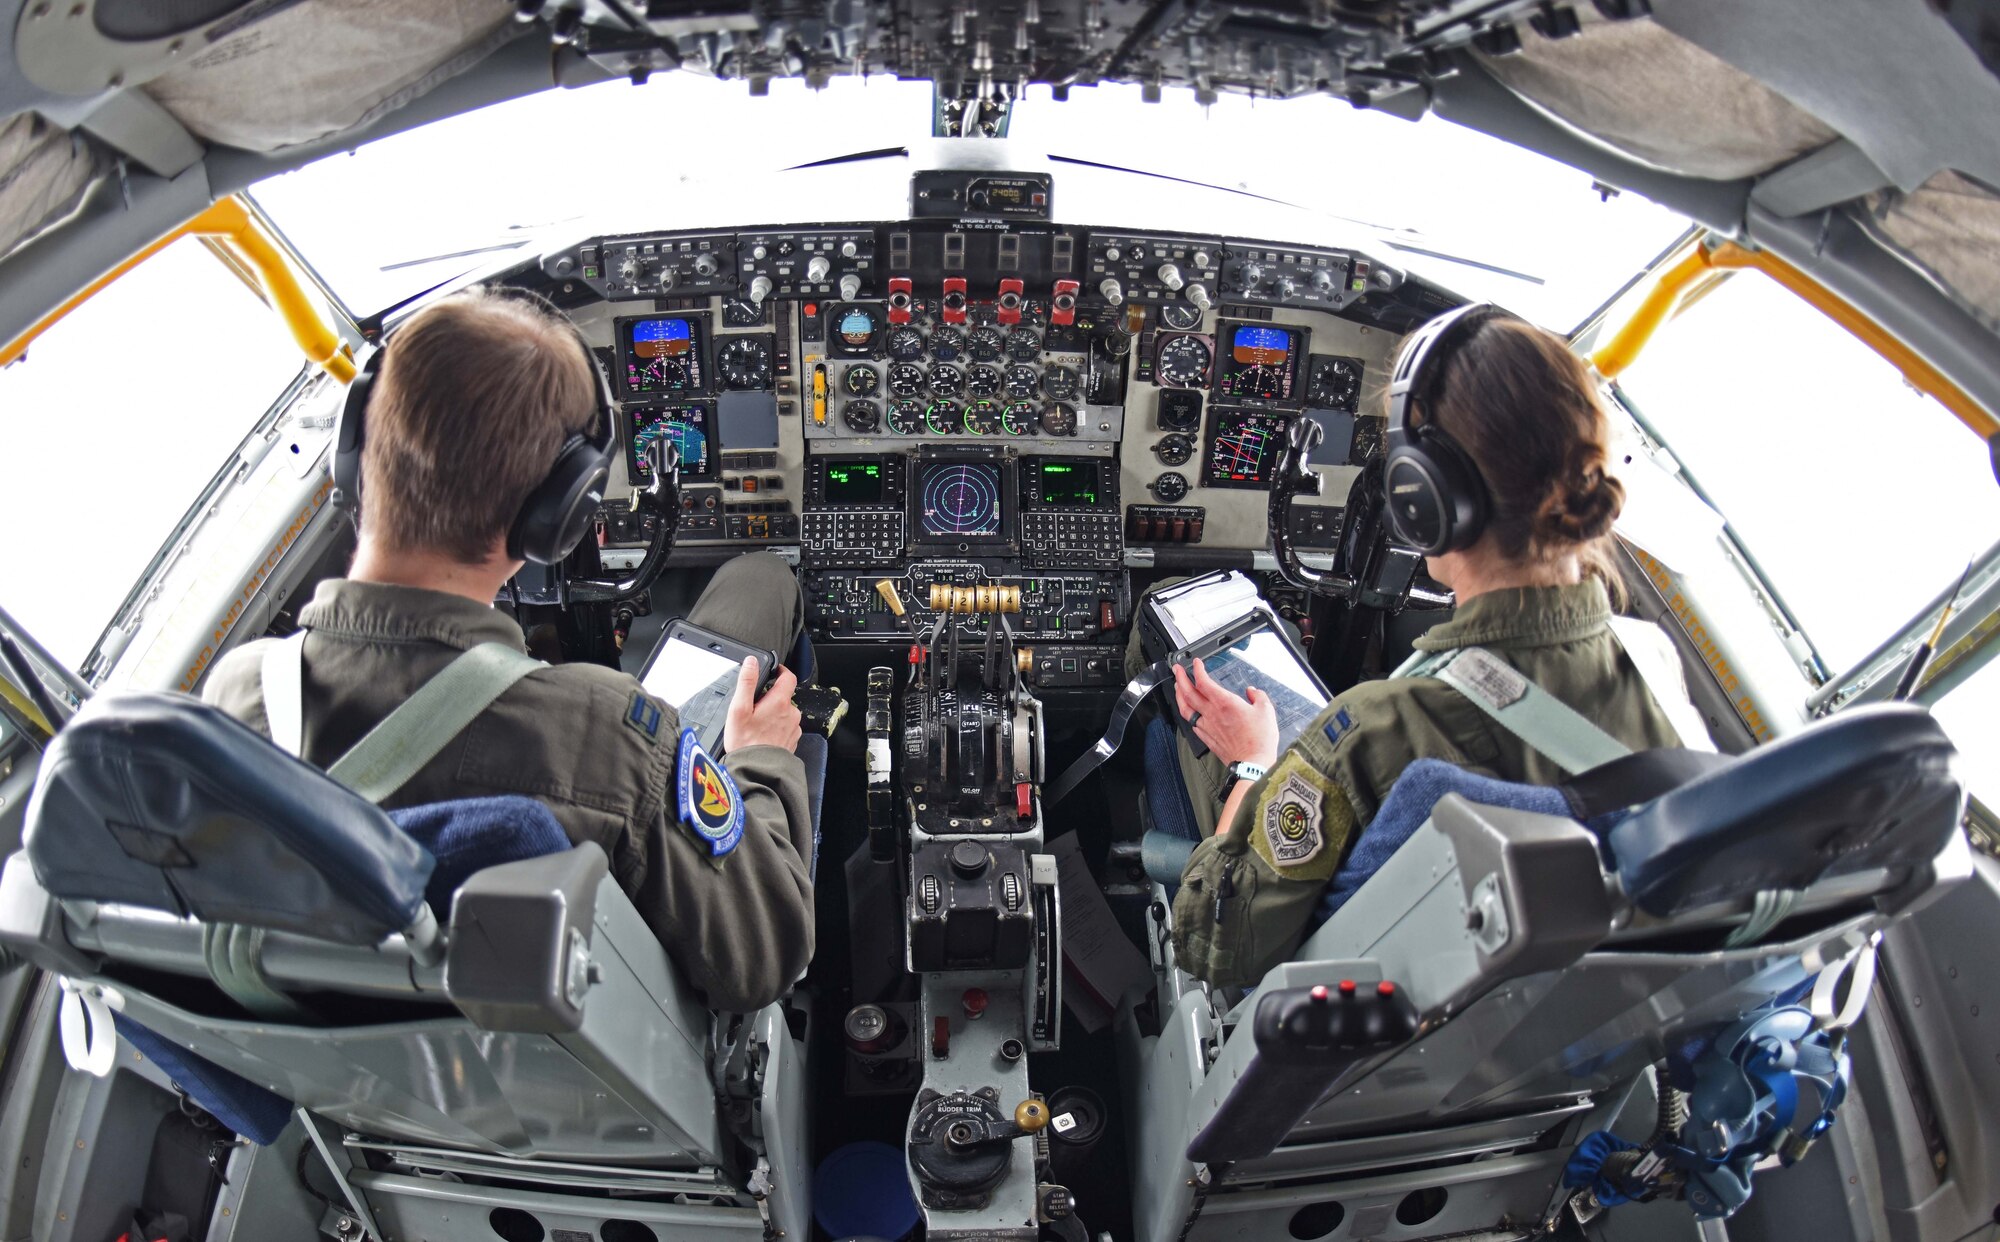 Captains Nicholas Boonstra, 351st Air Refueling Squadron pilot, left, and Marissa Hartoin, 351st ARS aircraft commander, review in-flight checklists over Scotland, July, 23, 2020. The 351st ARS, as part of the 100th Air Refueling Wing, conducts air refueling and combat support operations throughout the European and African area of responsibility. (U.S. Air Force photo by Senior Airman Brandon Esau)